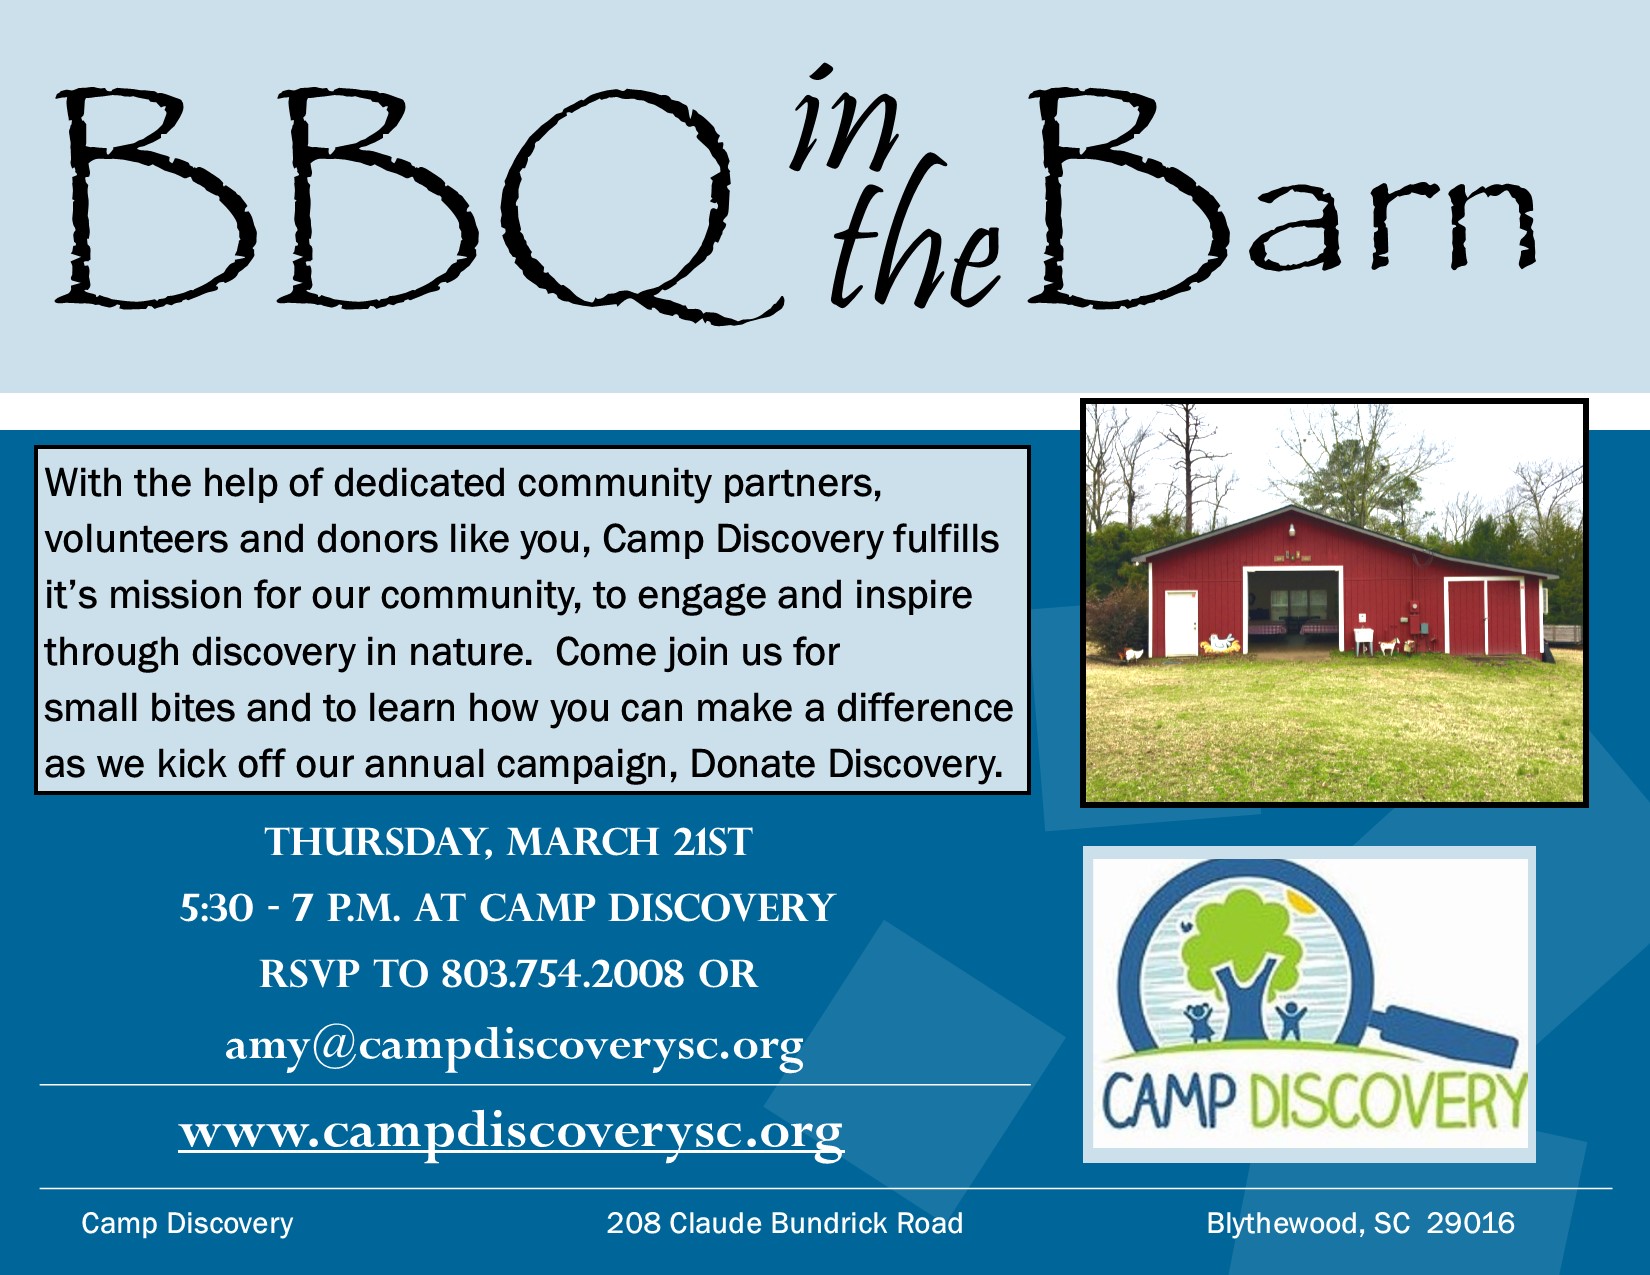 Camp Discovery BBQ in the Barn 2019